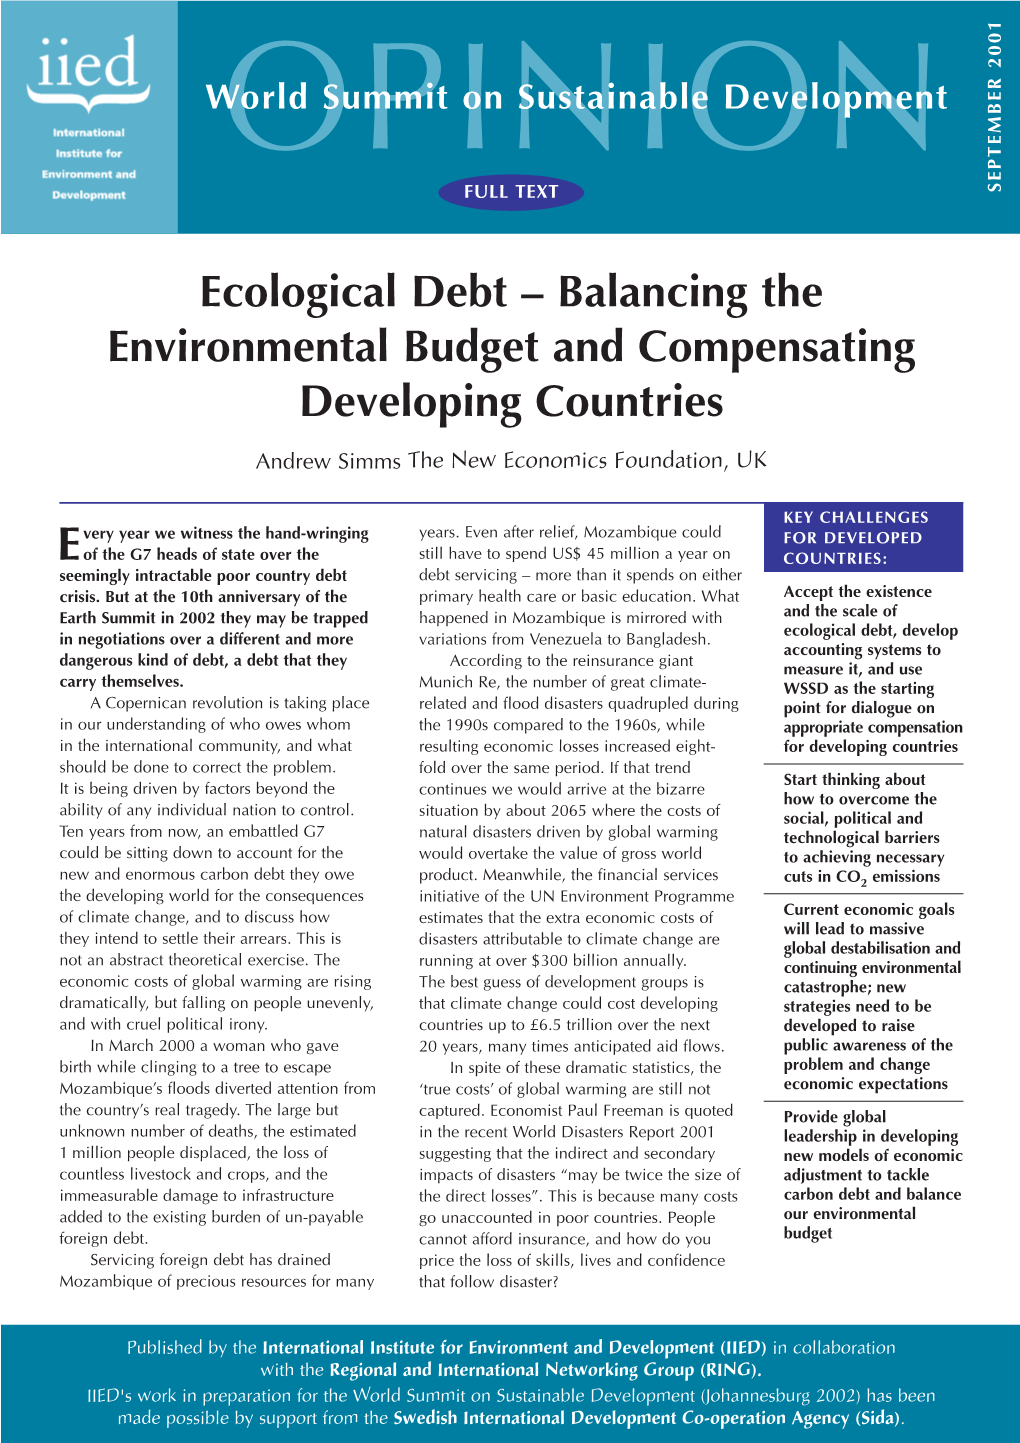 Ecological Debt – Balancing the Environmental Budget and Compensating Developing Countries